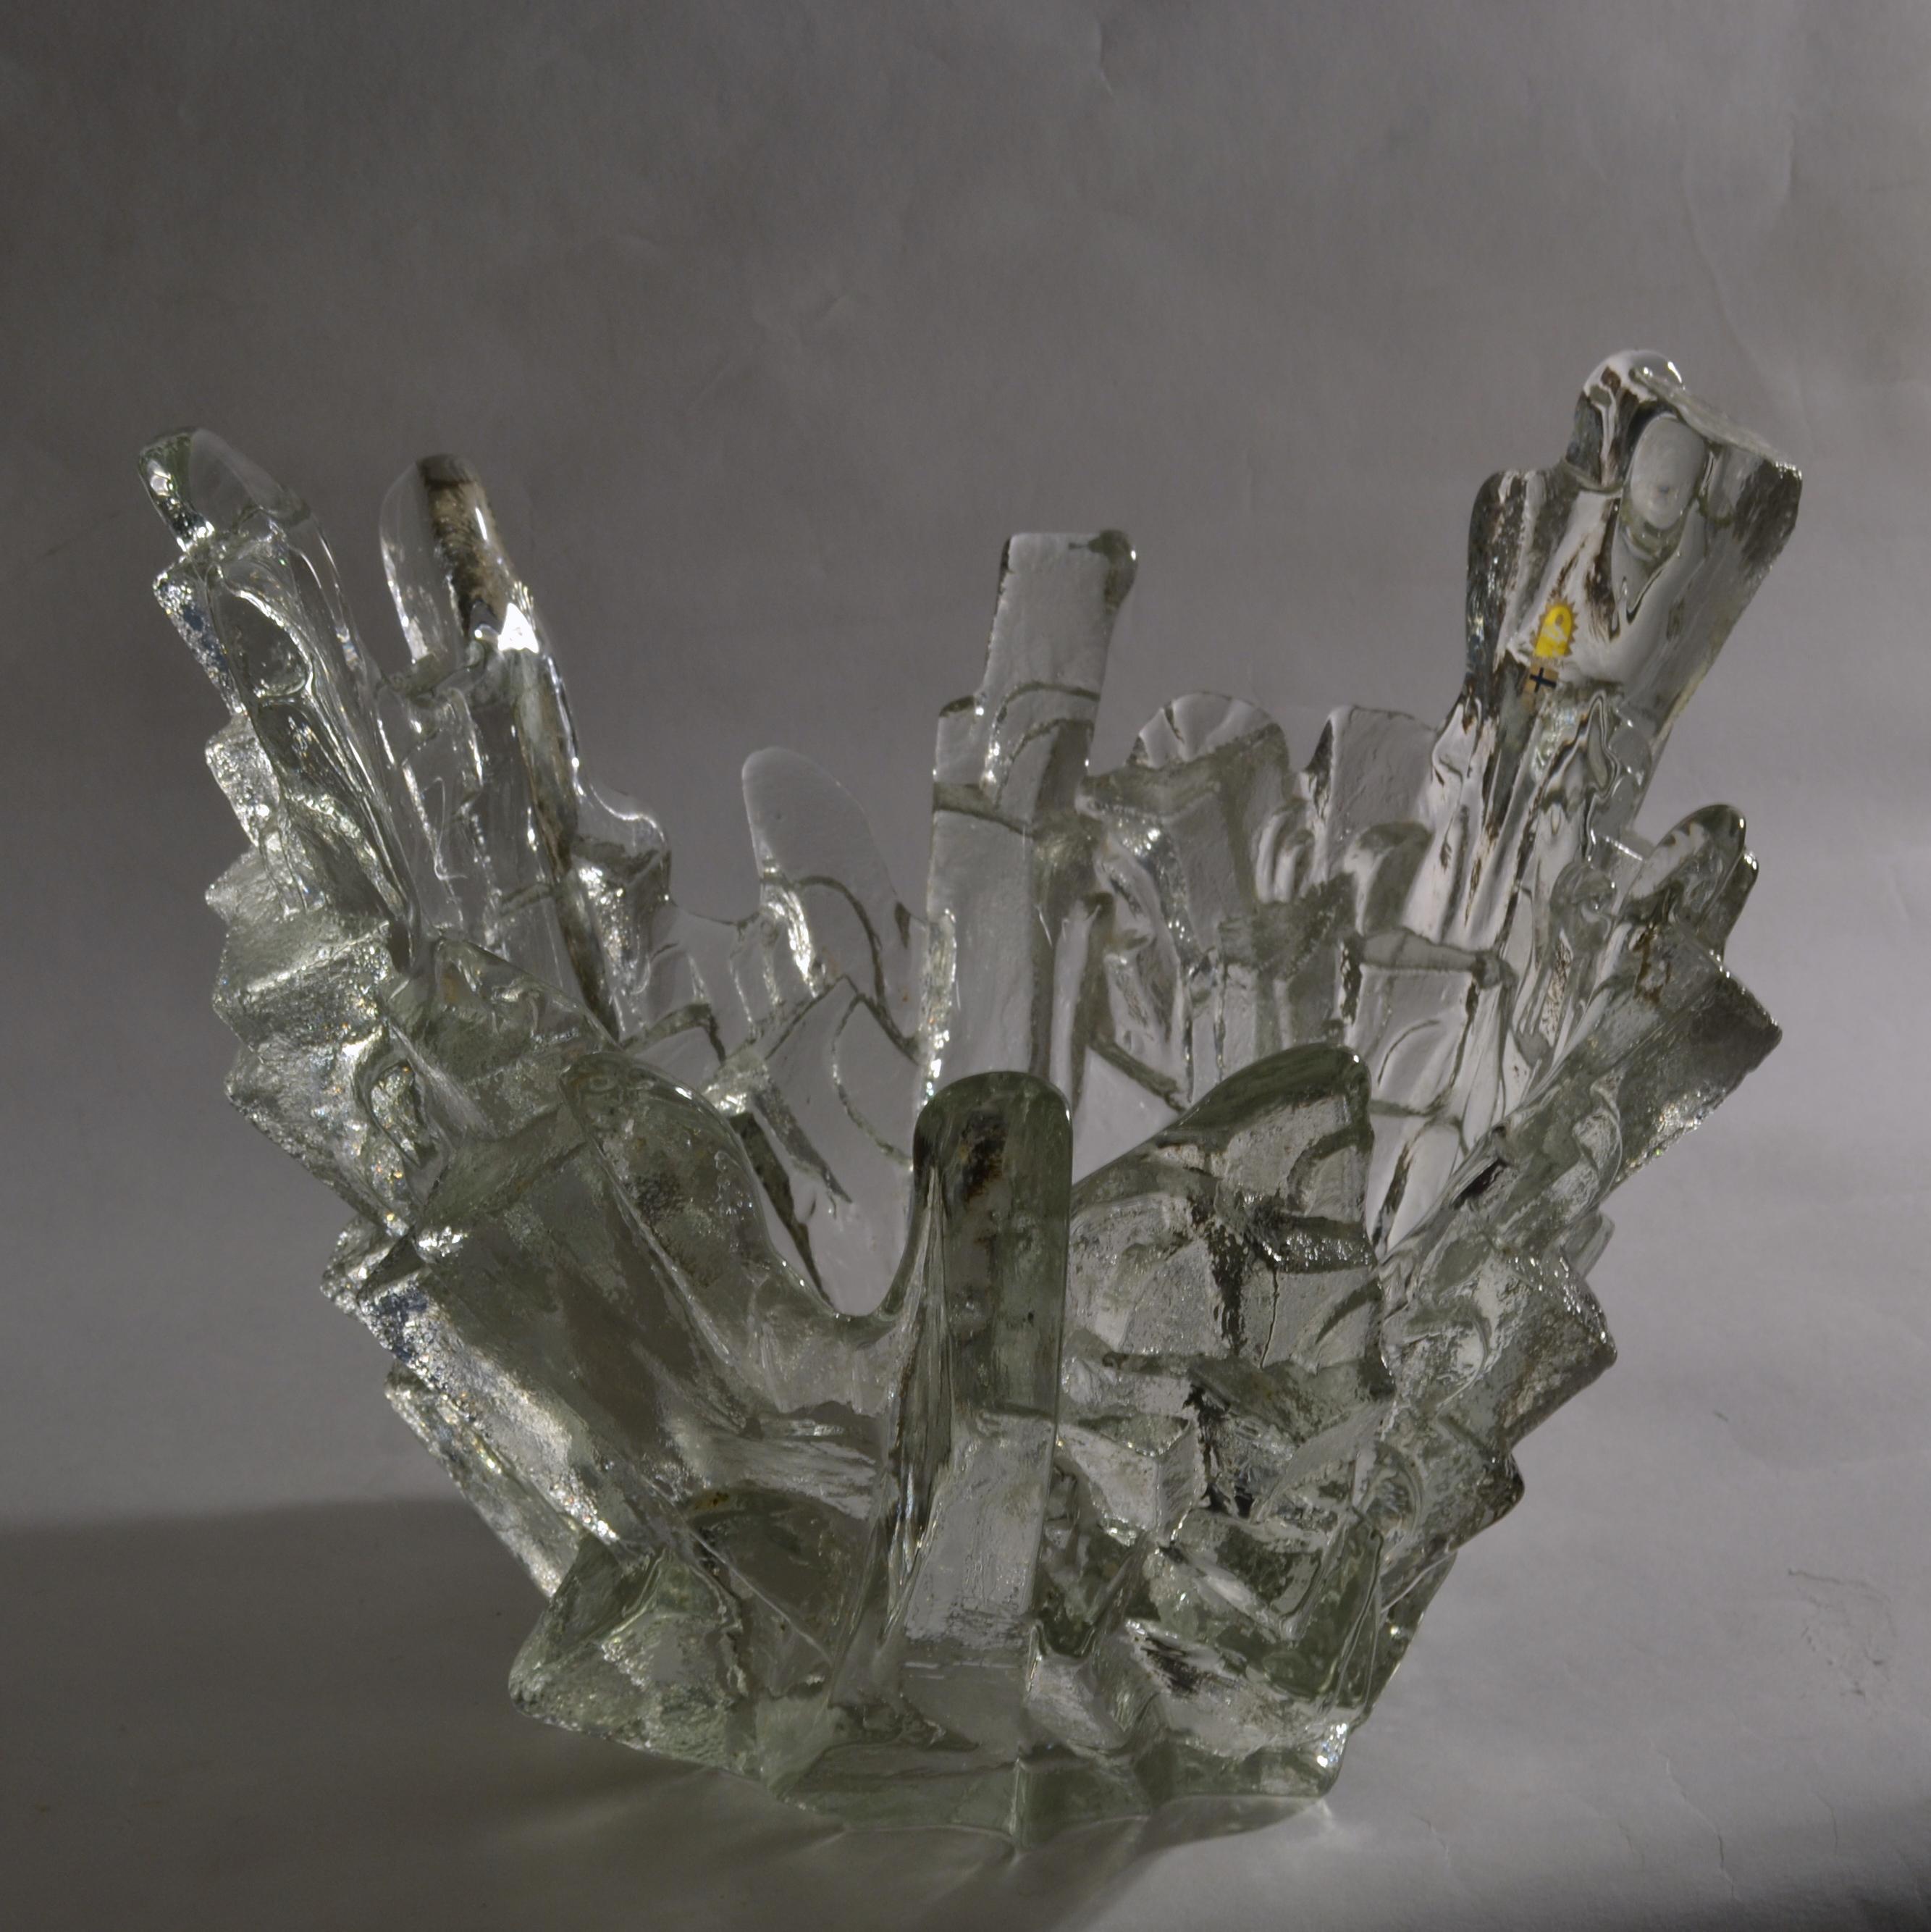 Hand-Crafted 1960s Art Glass Crystal Clear Bowl like Icicles by Santalahti, Humppila, Finland